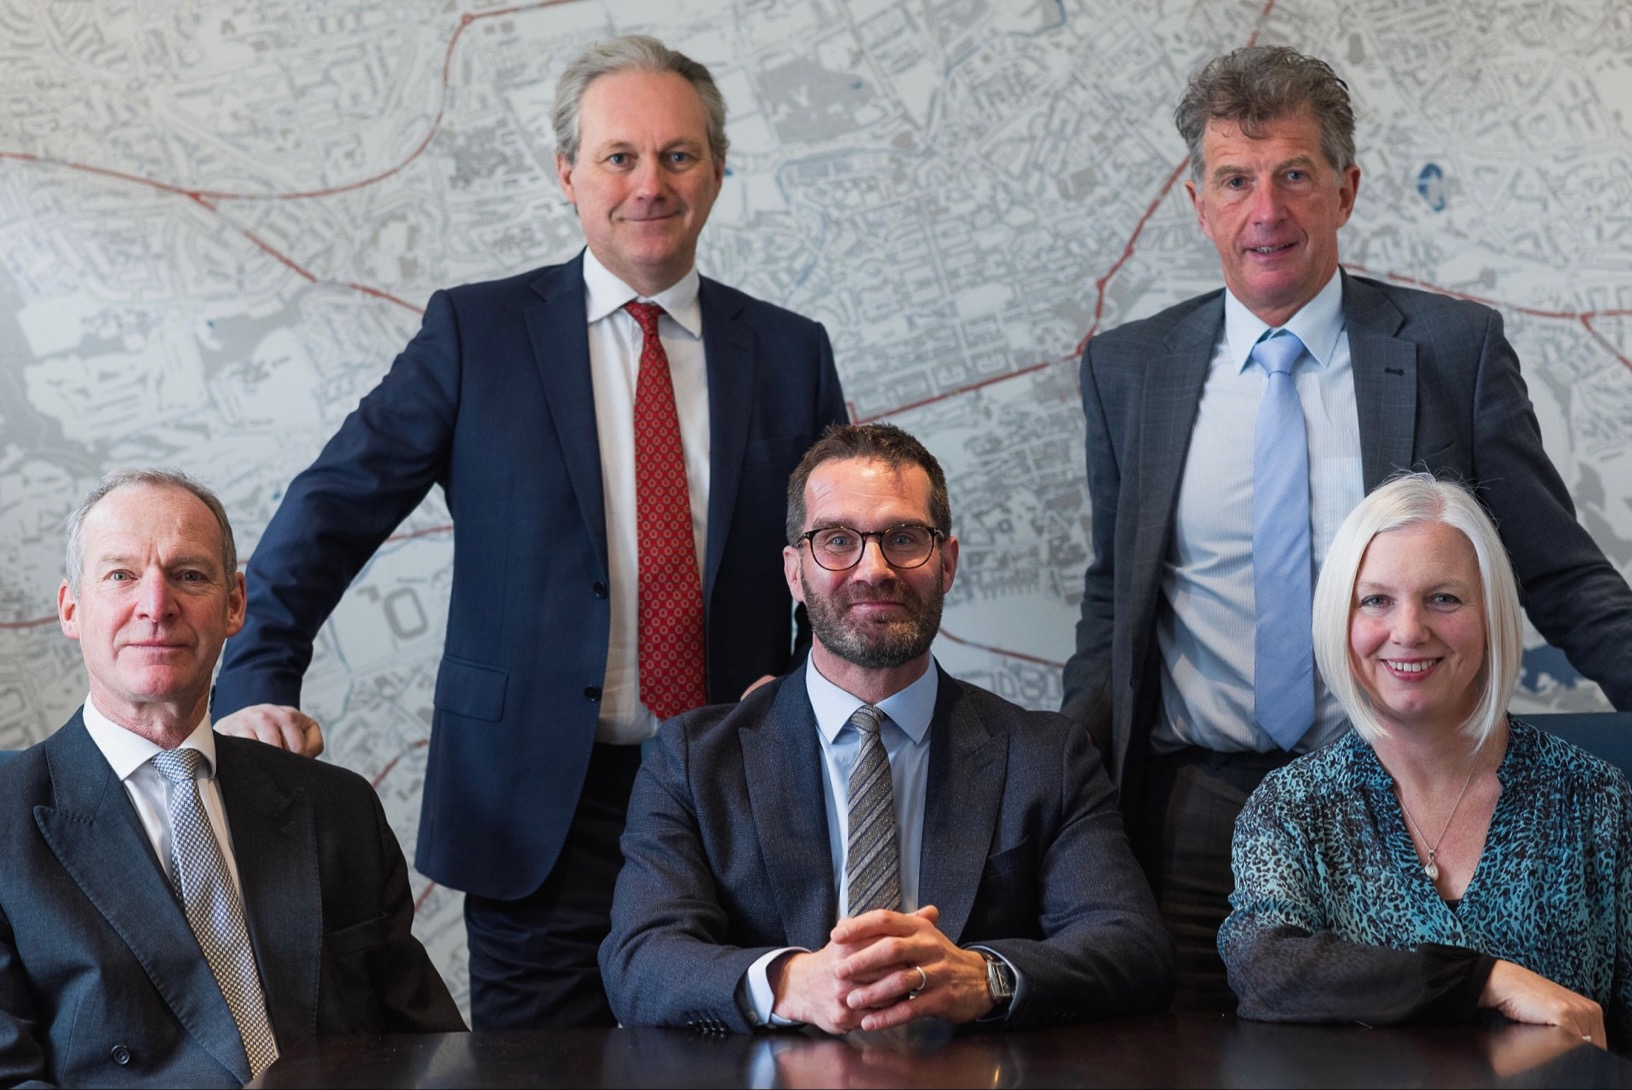 Featured in Image from Left to Right: Simon Rettie FRICS (Managing Director), Matthew Benson (Director, Development Services), Neil Cunningham (Commercial Director), David Gibson (Finance Director), Becky Lindsay (Chief Operating Officer)